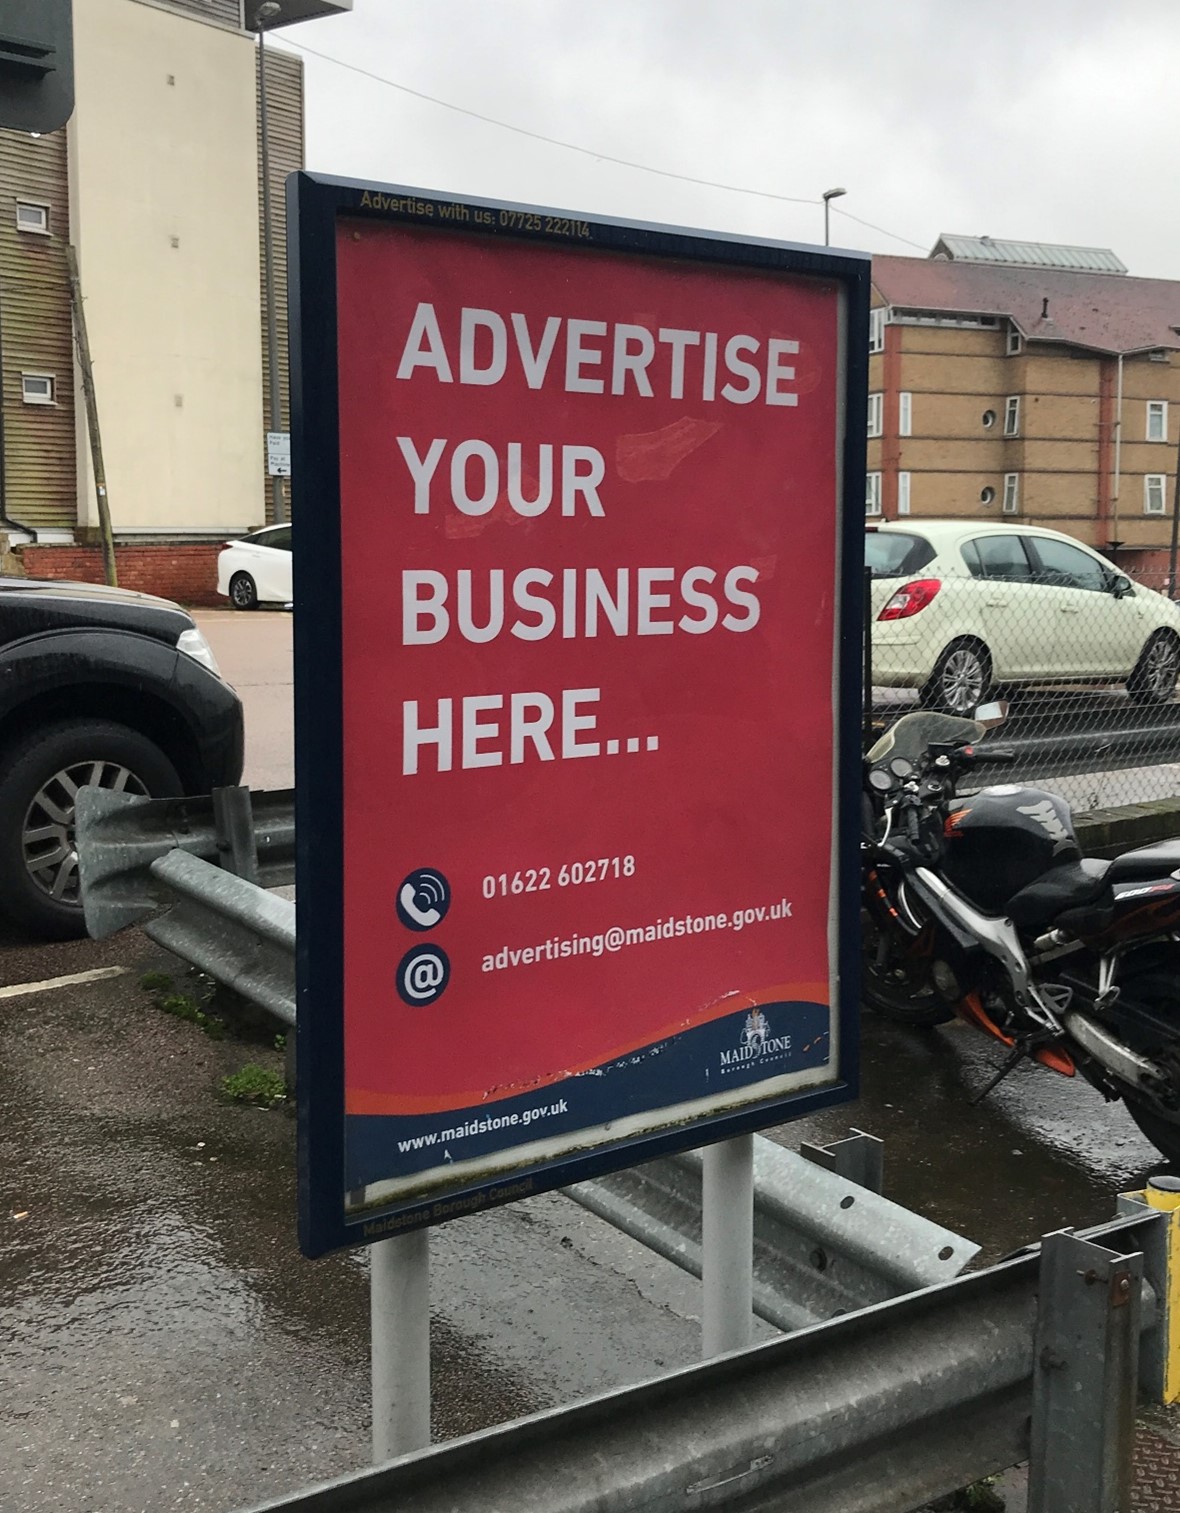 A poster with text to indicate how an advert would display